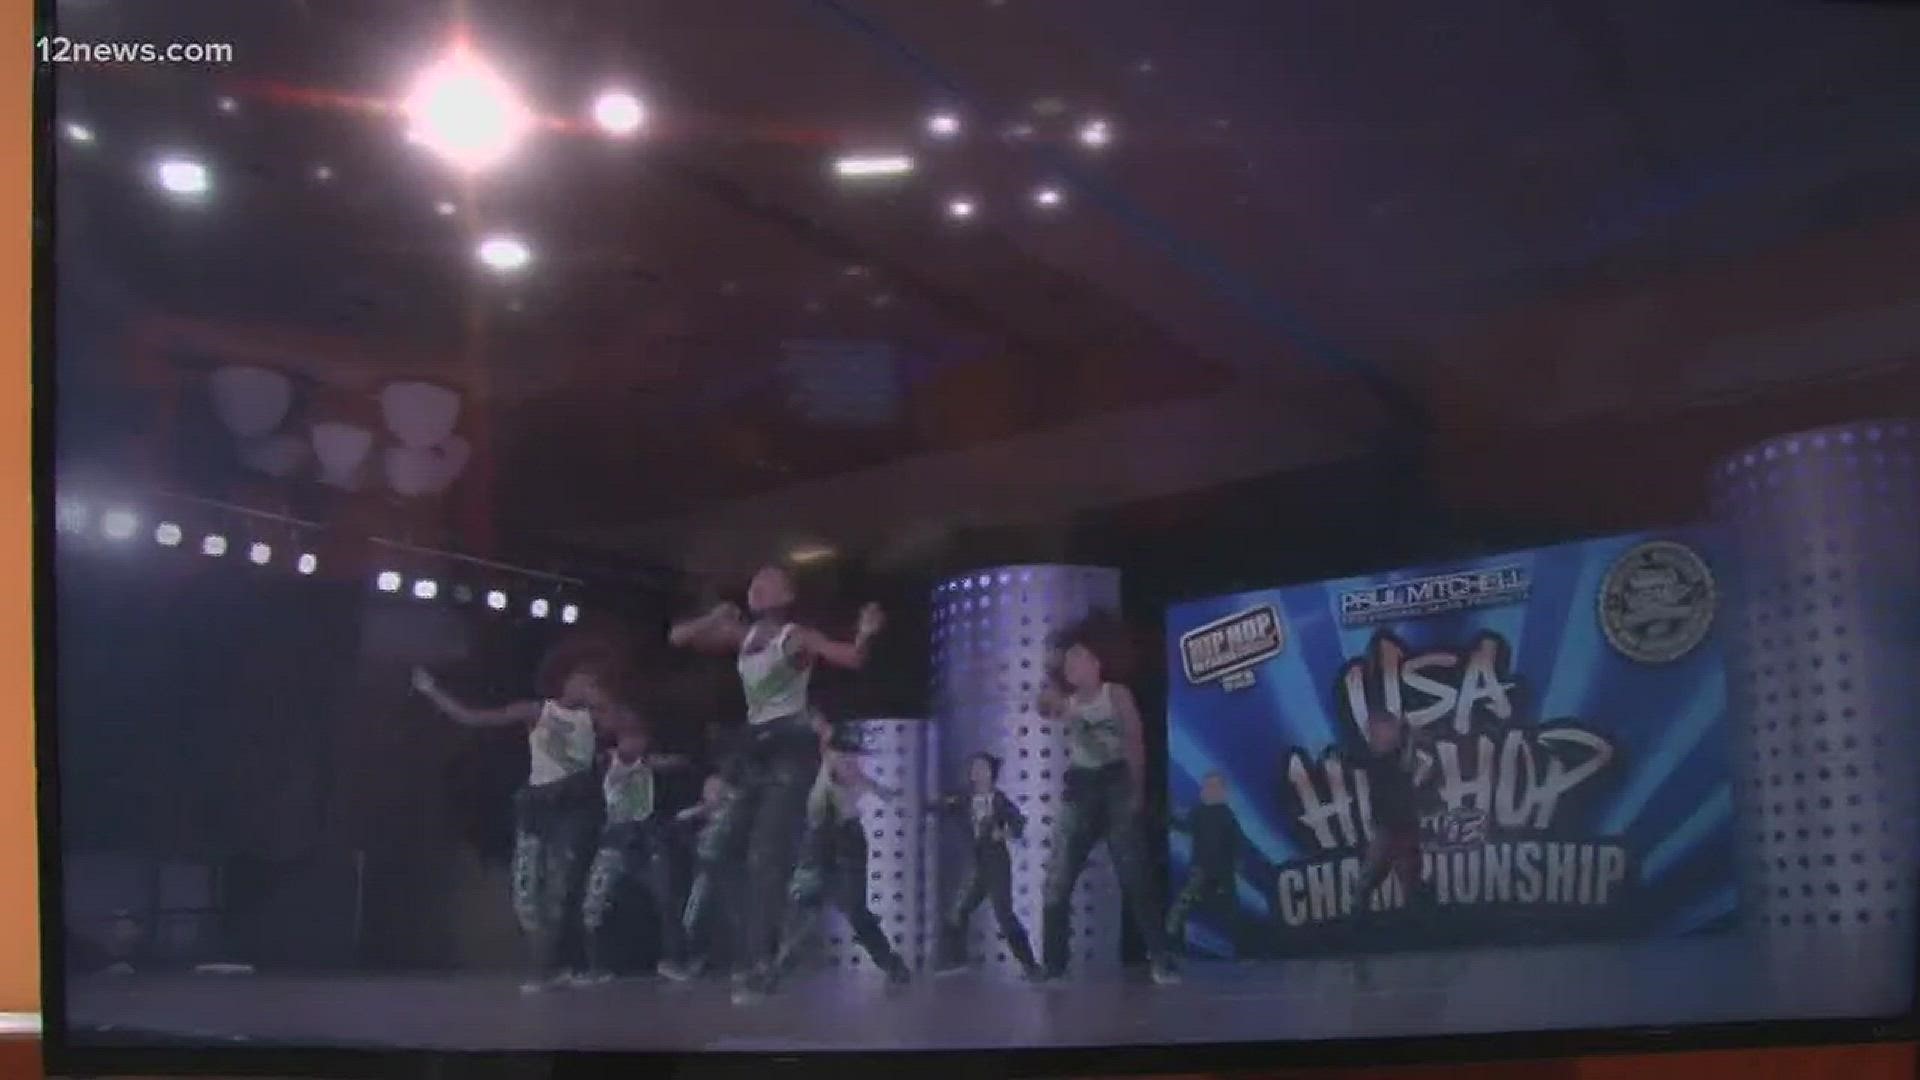 4,000 Hip Hop Champs are in Phoenix for  the USA Hip Hop Championship competition.